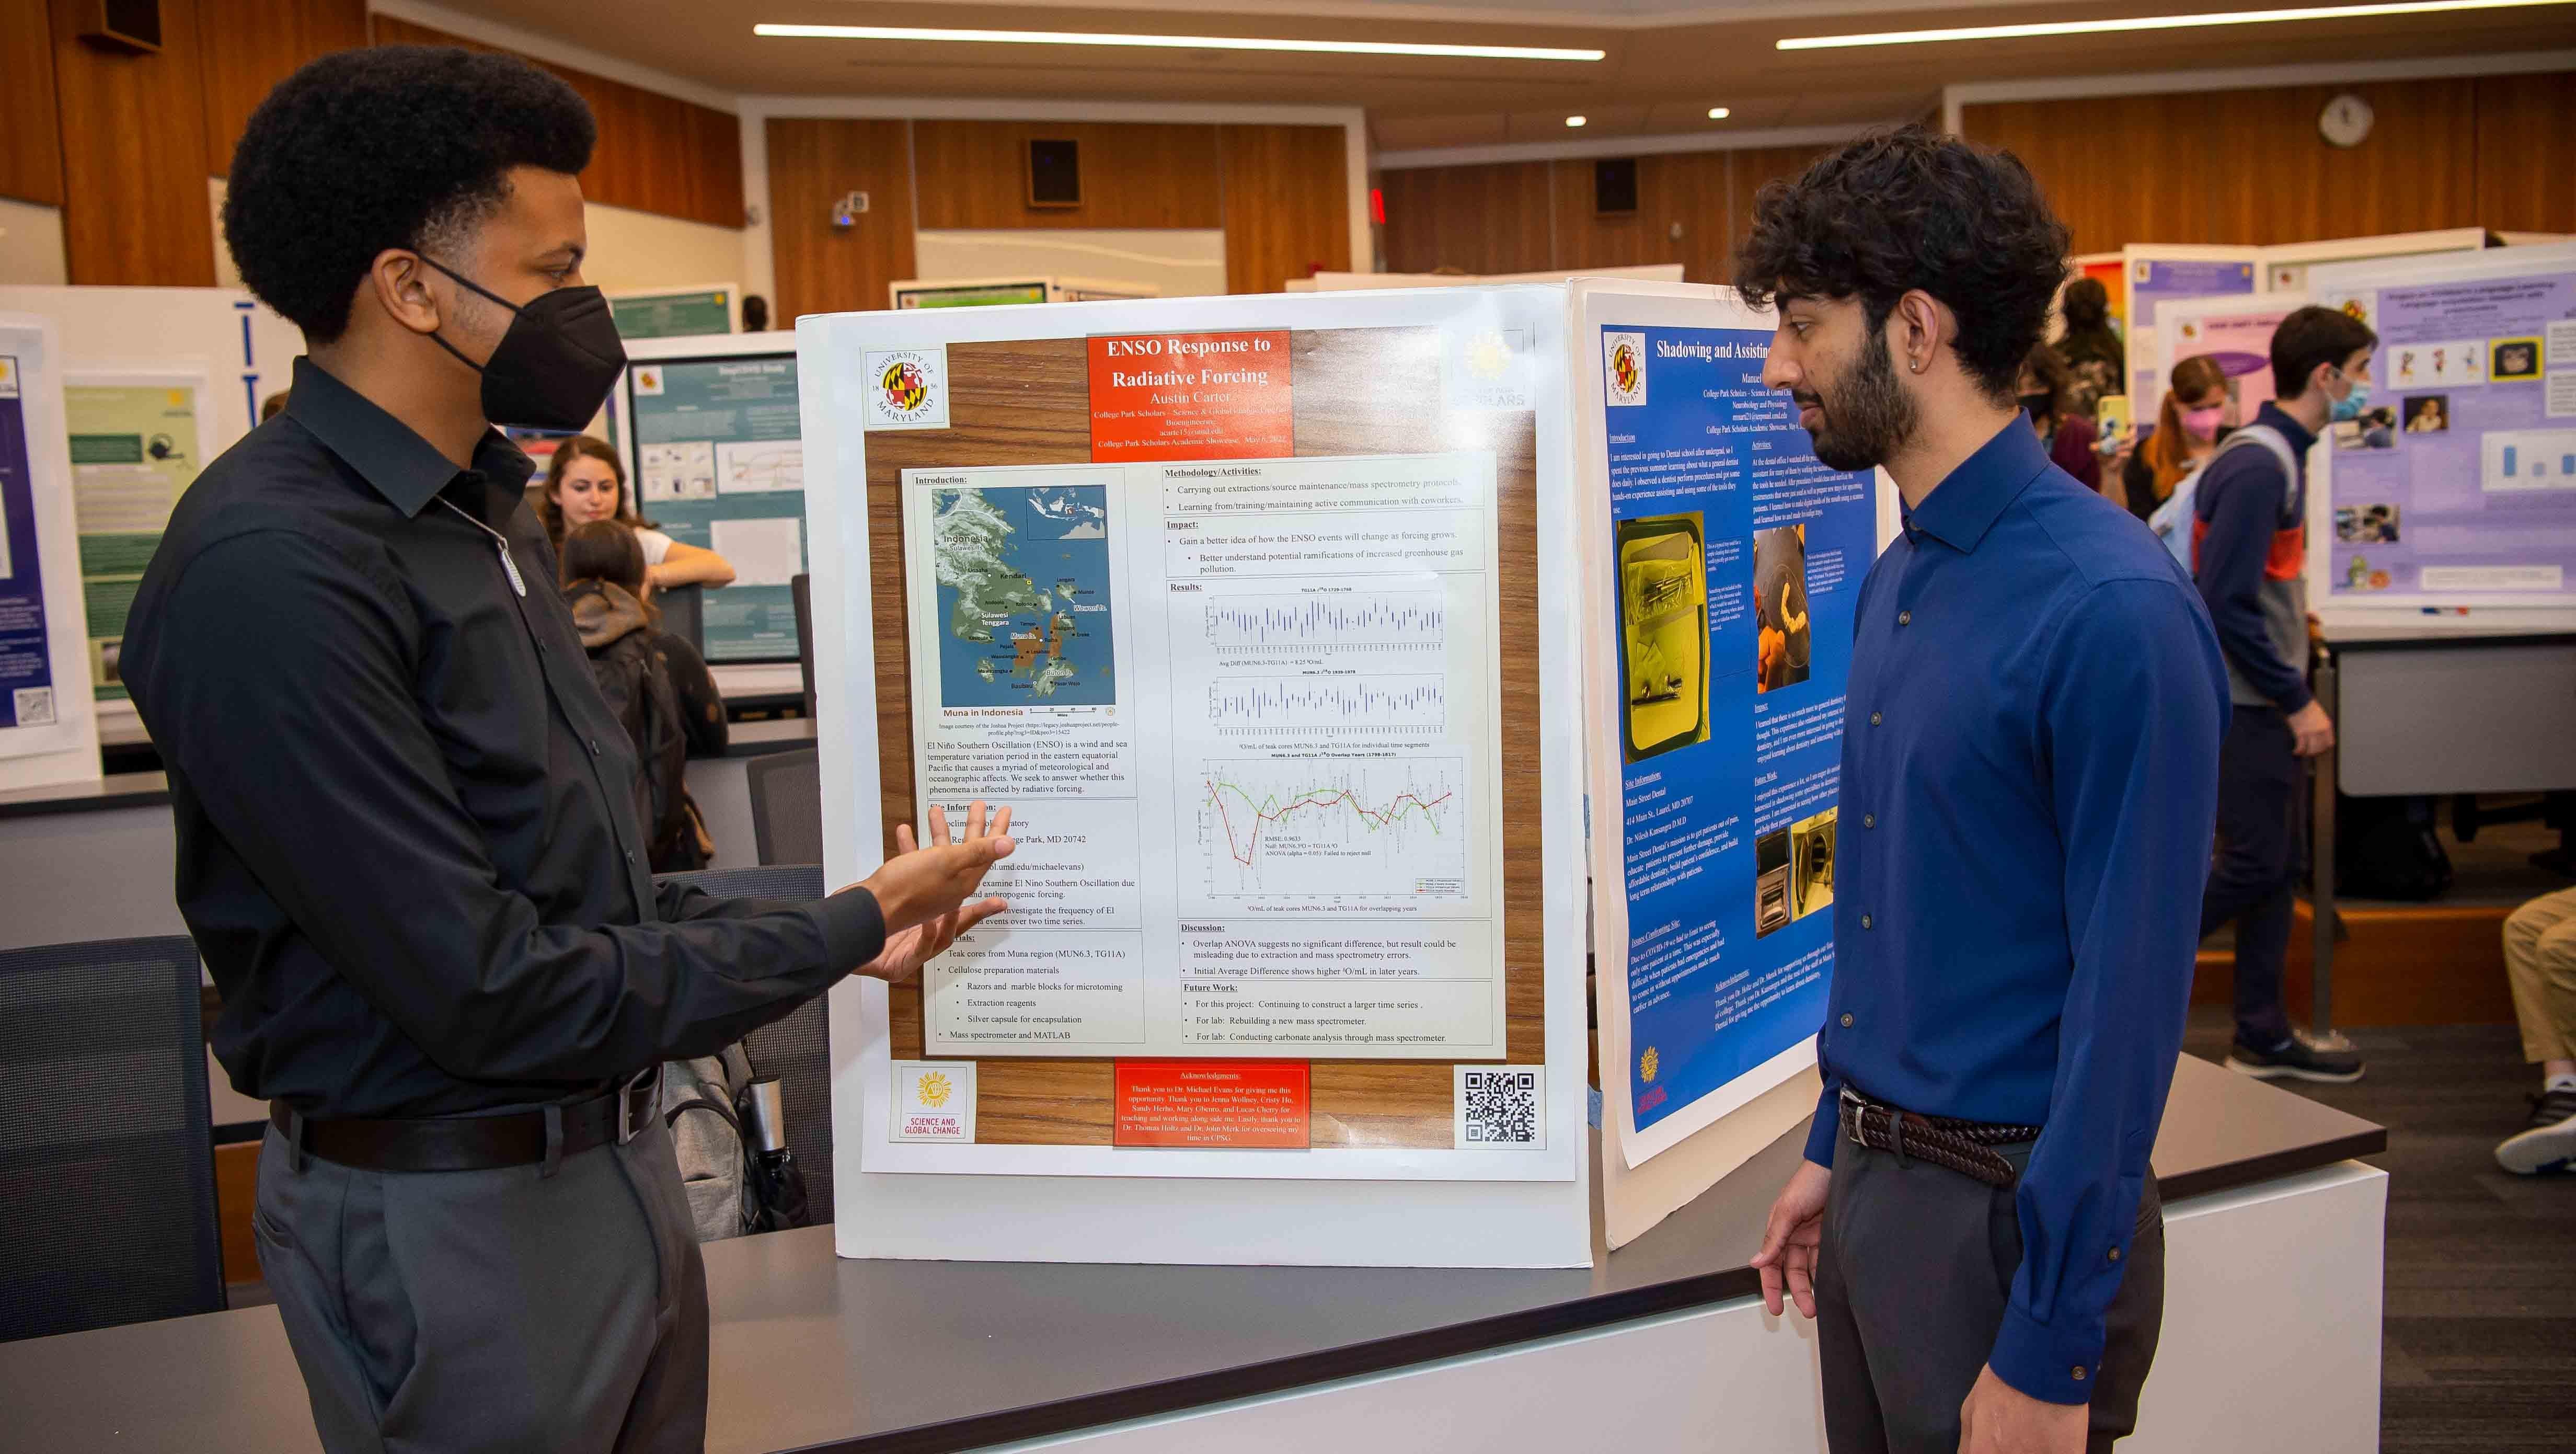 One male student gestures at an academic poster while a second male student looks on